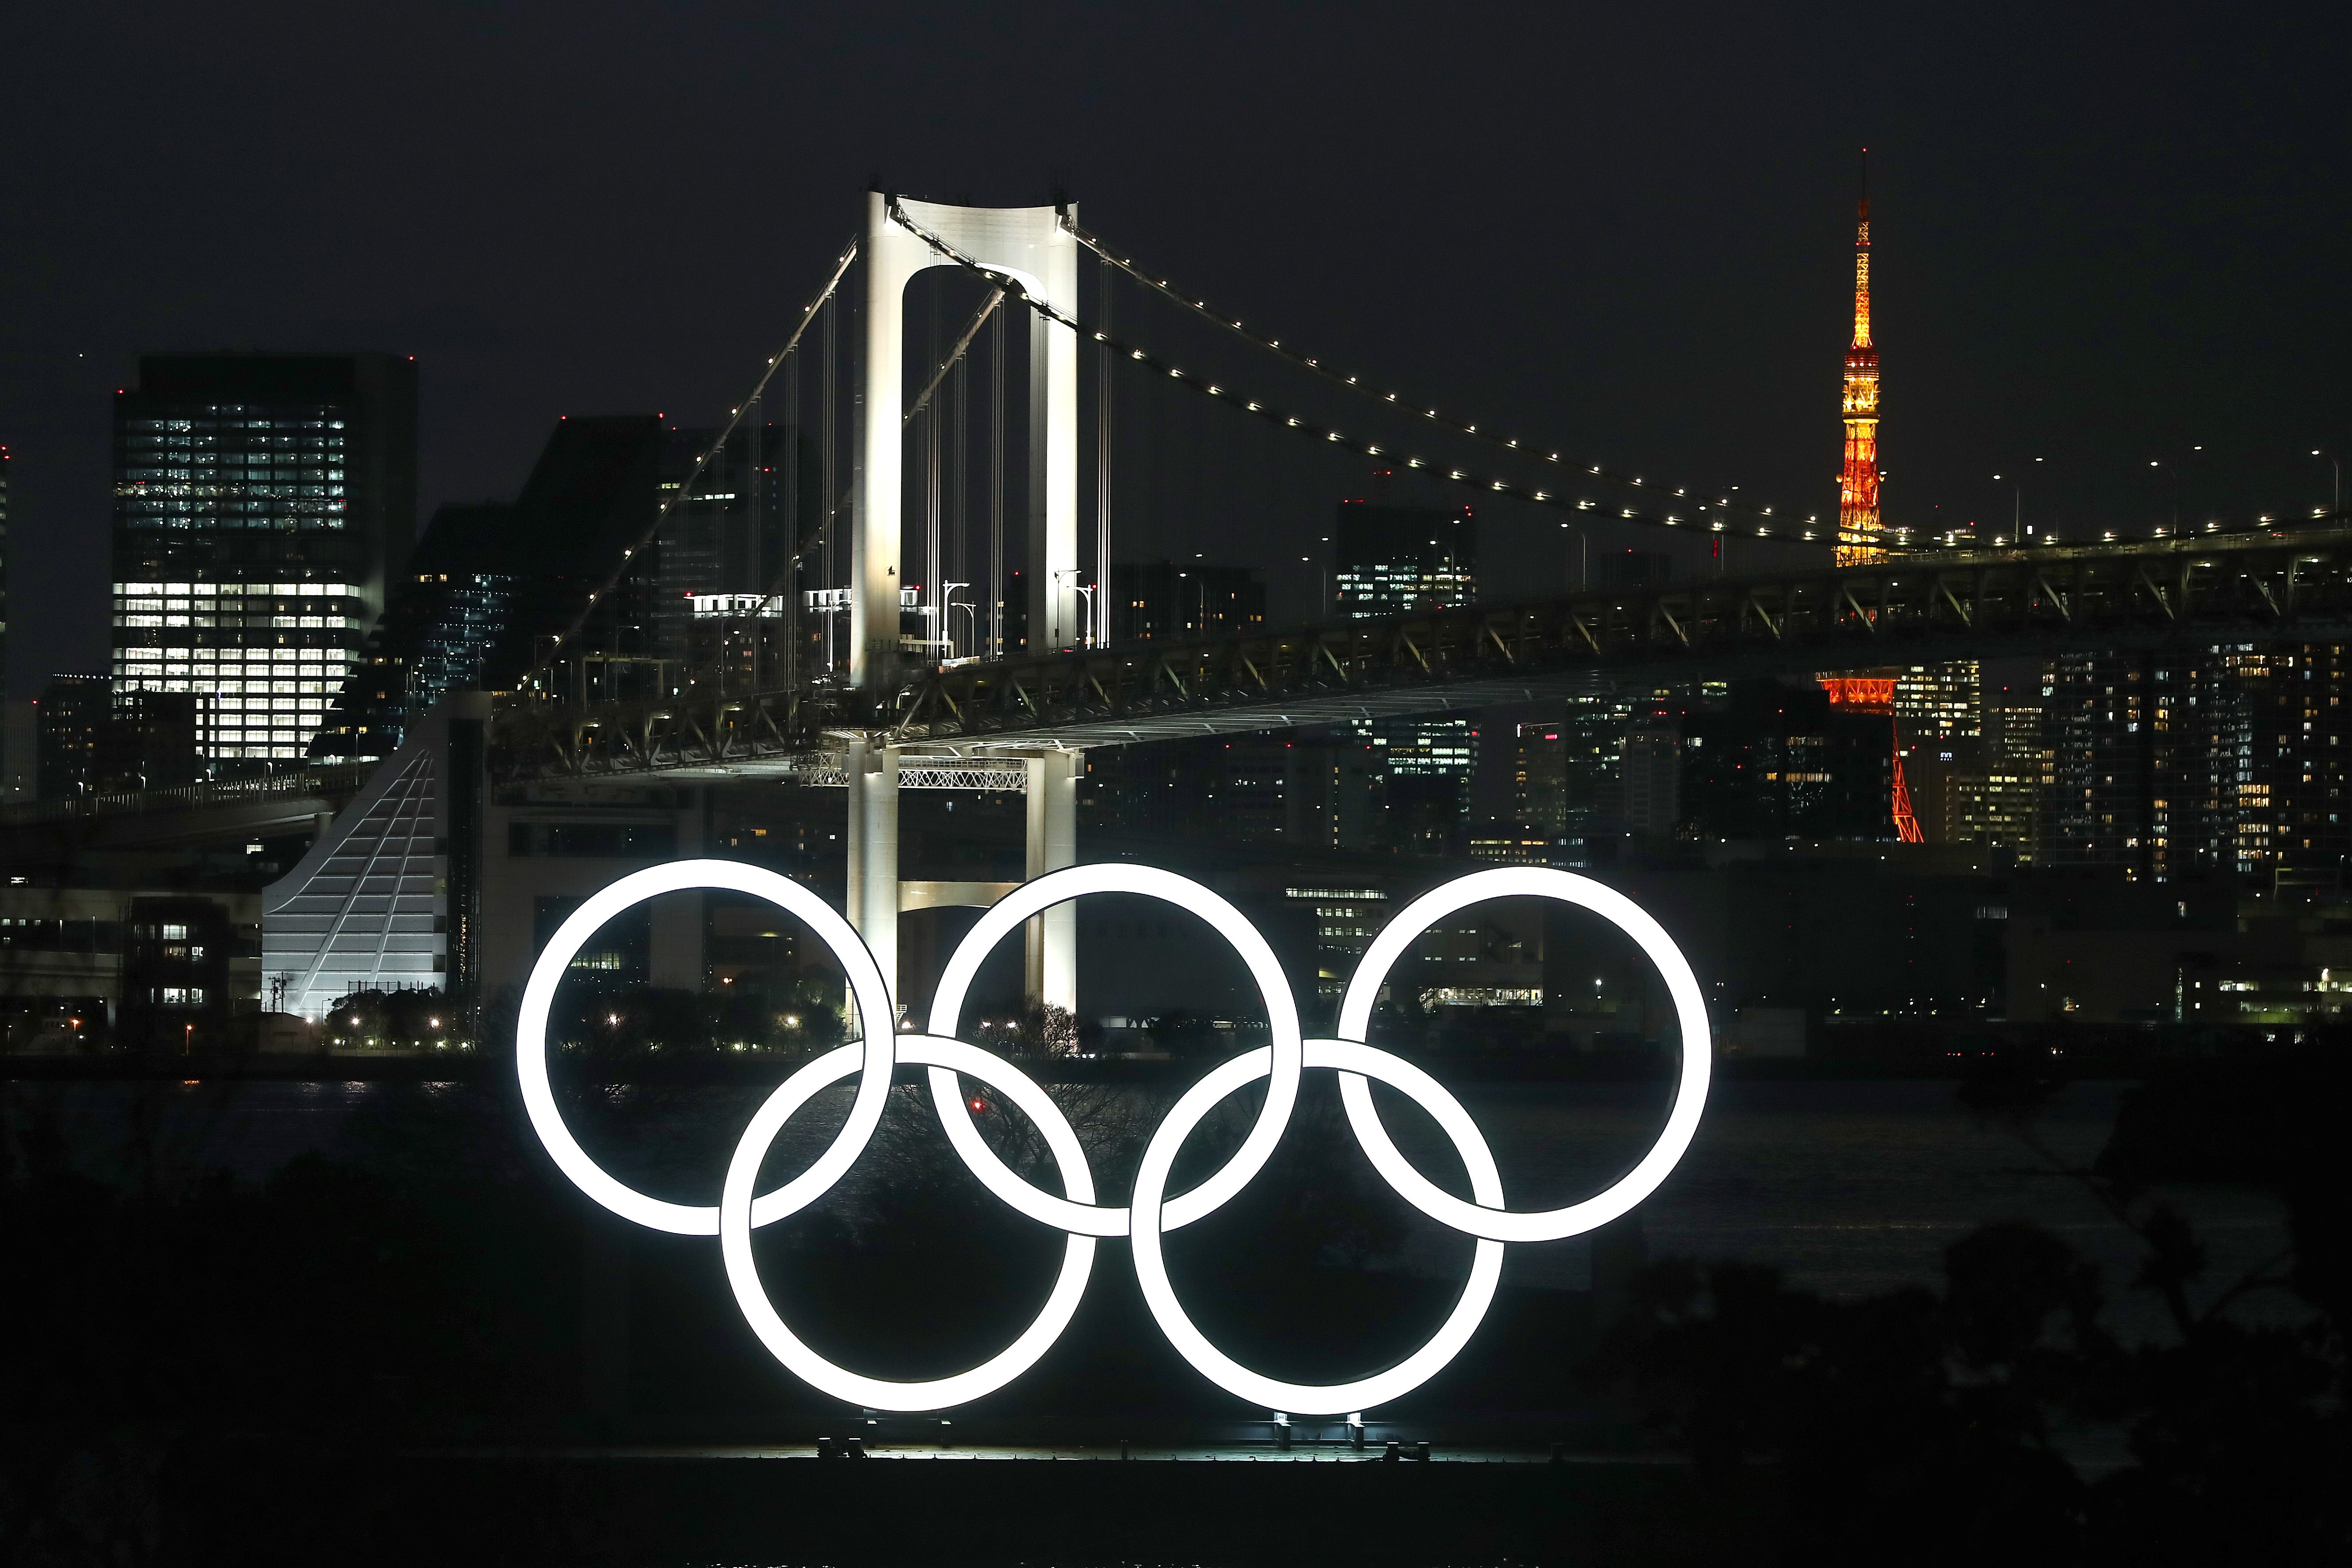 The Tokyo Olympics are due to held from 23 July this year